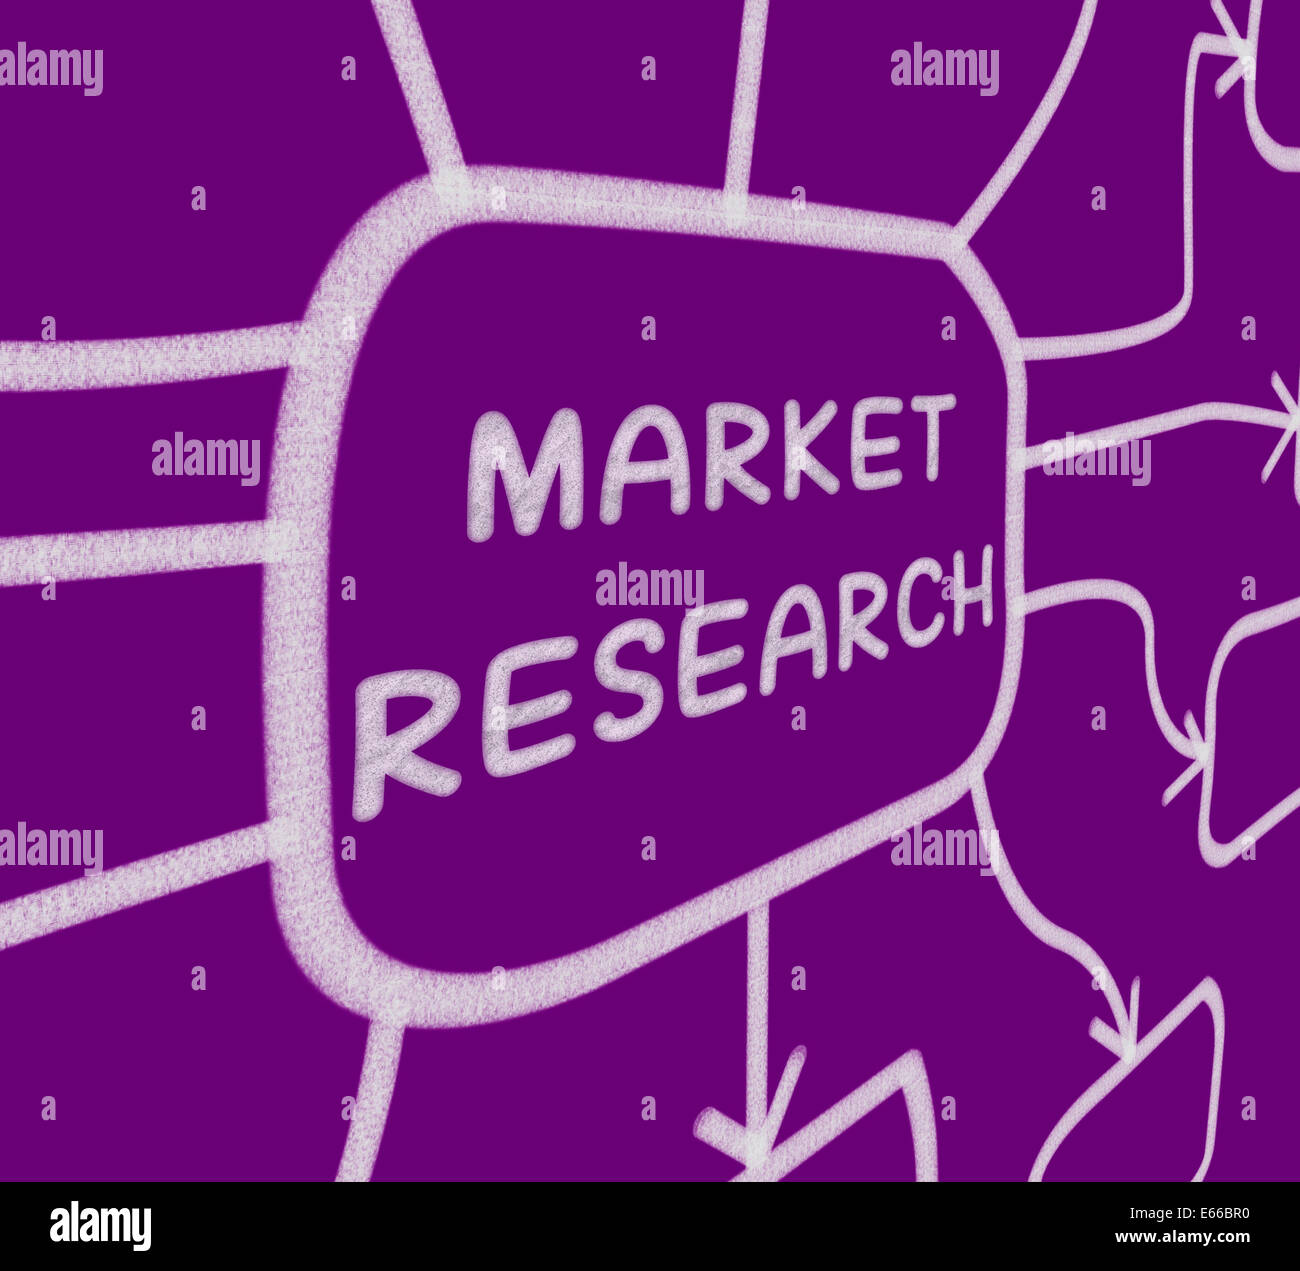 Market Research Diagram Showing Researching Consumer Demand And Preferences Stock Photo